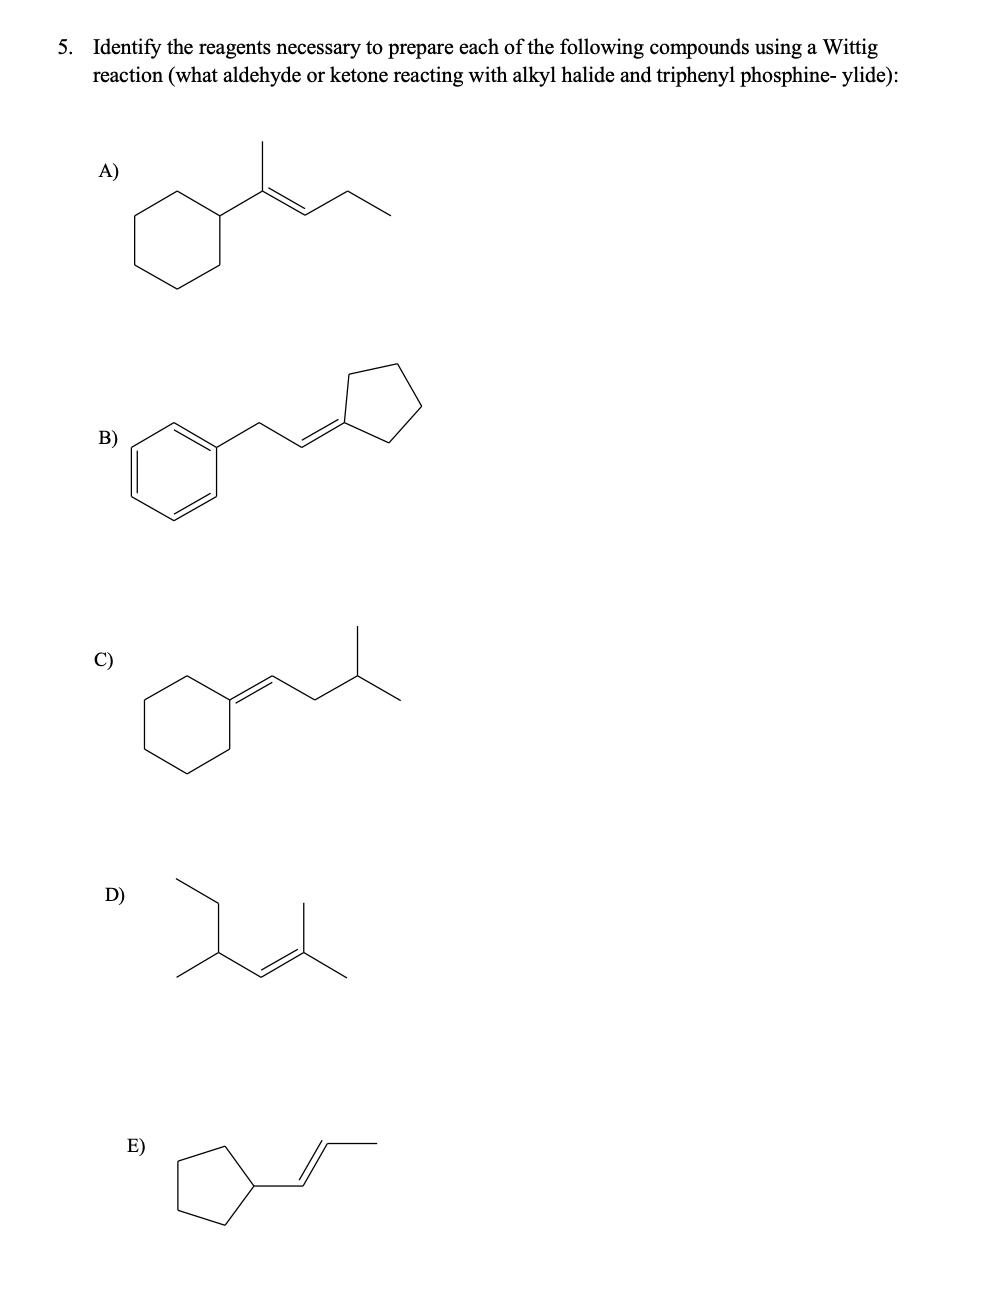 5. Identify the reagents necessary to prepare each of the following compounds using a Wittig
reaction (what aldehyde or ketone reacting with alkyl halide and triphenyl phosphine- ylide):
A)
B)
C)
D)
E)
